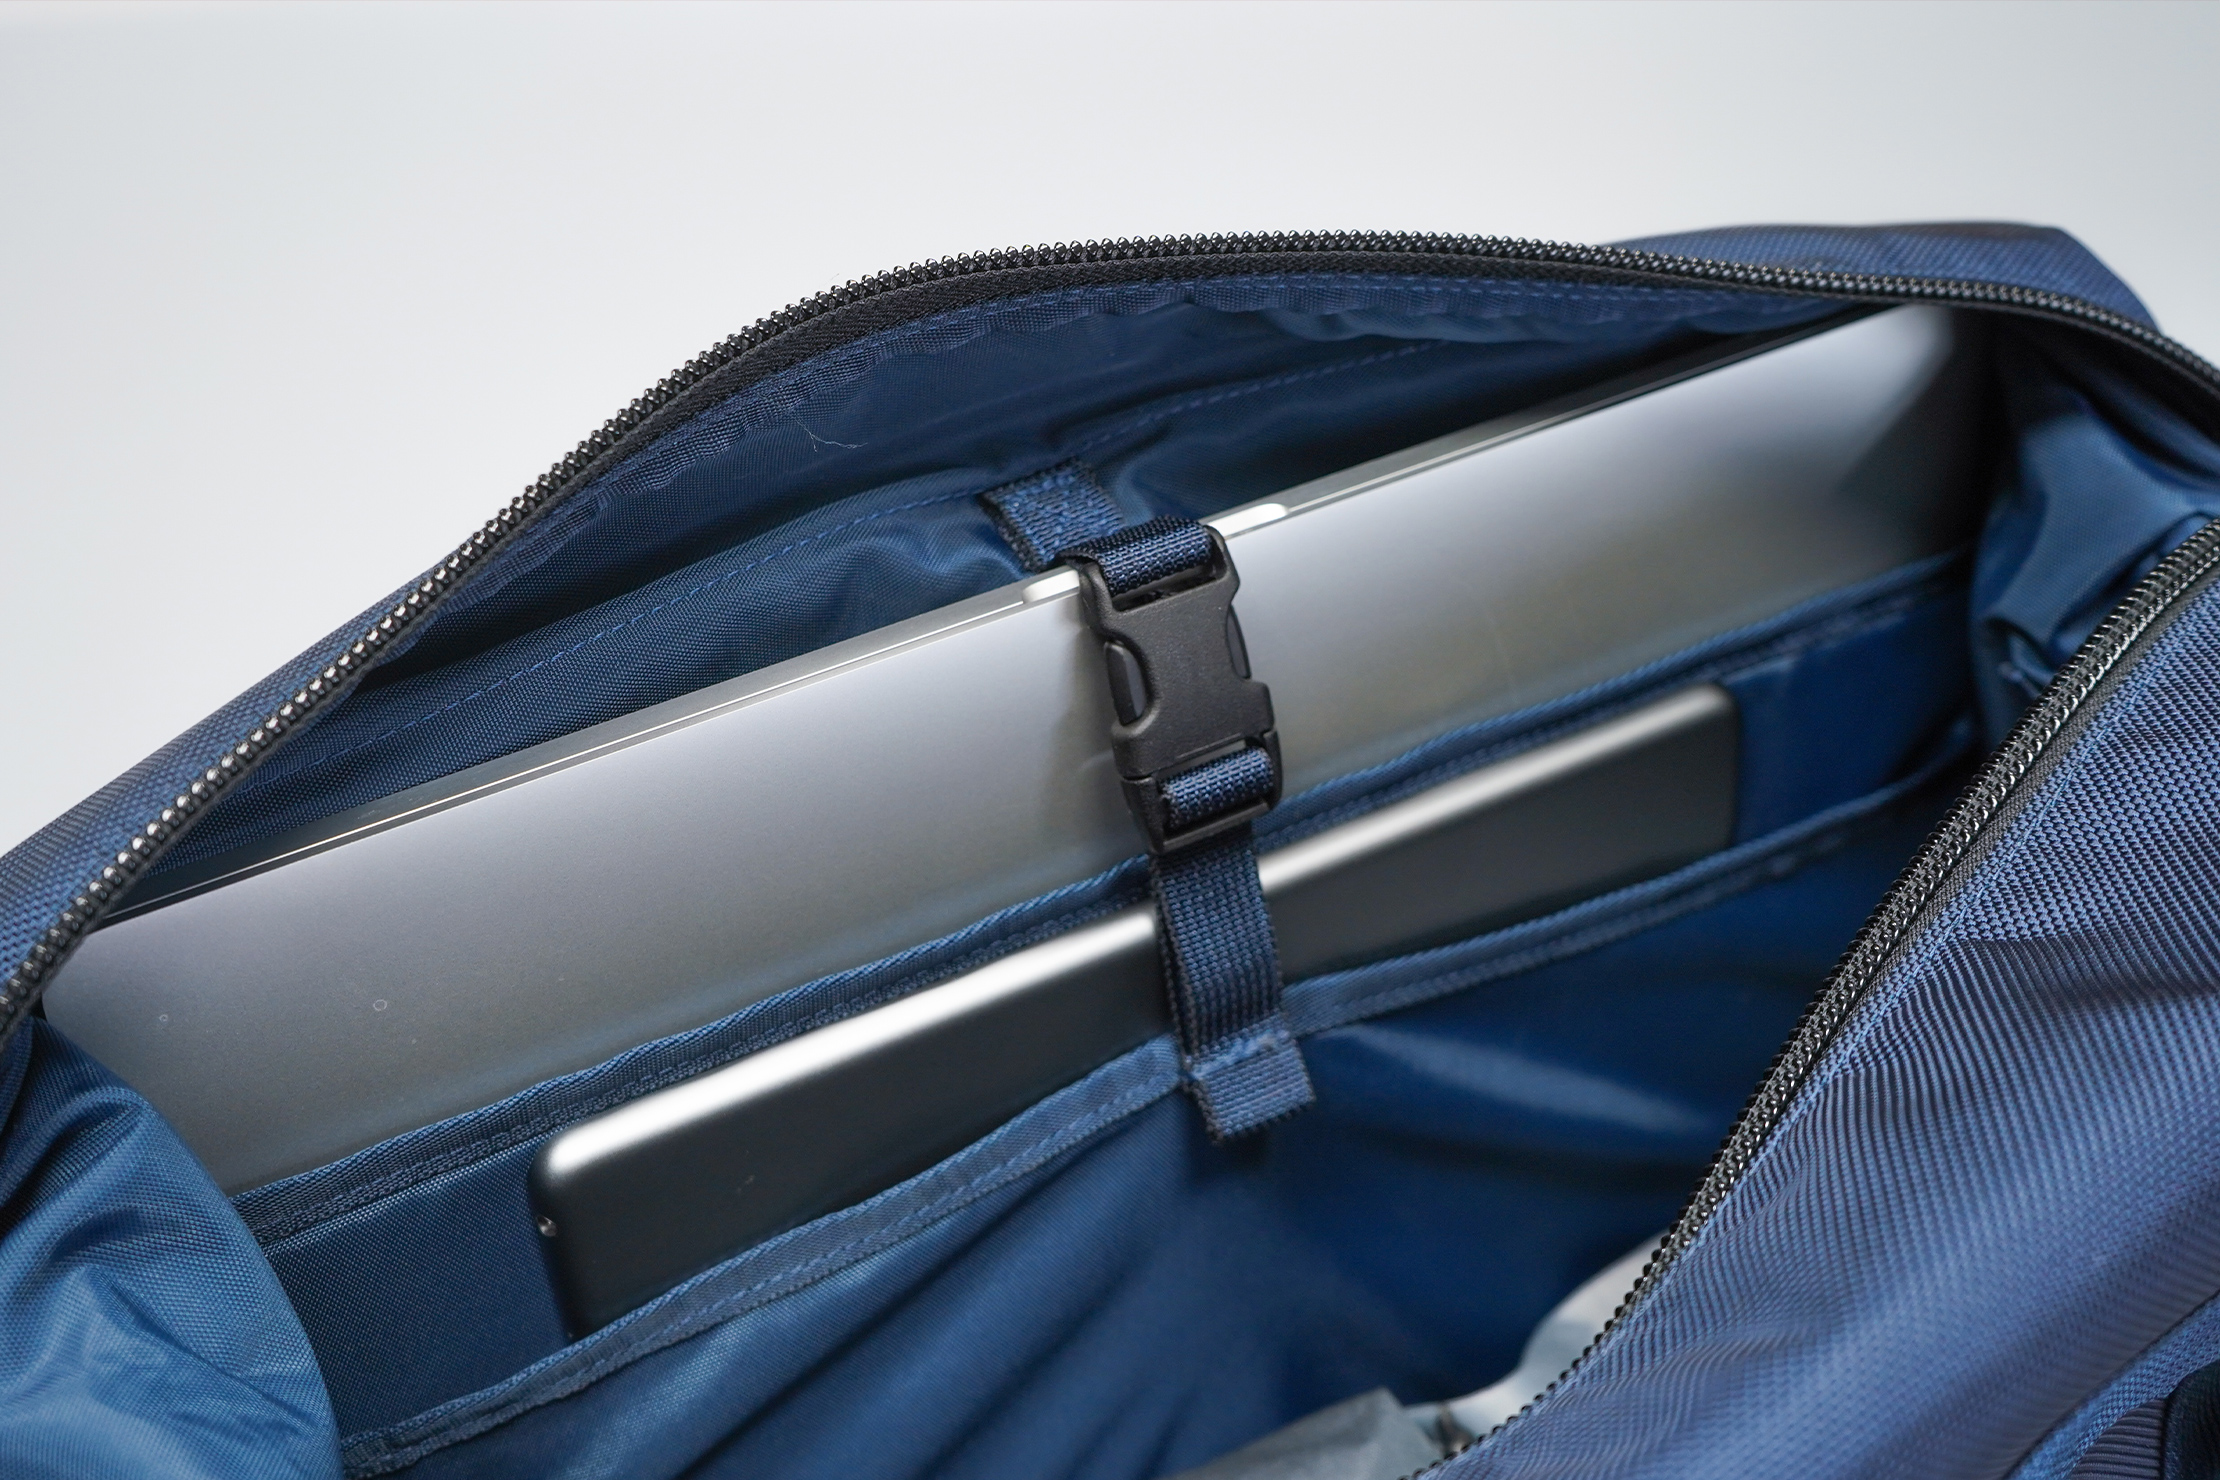 DSPTCH Utility Tote | DSPTCH hasn’t forgotten about how we love to carry around laptops and tablets these days